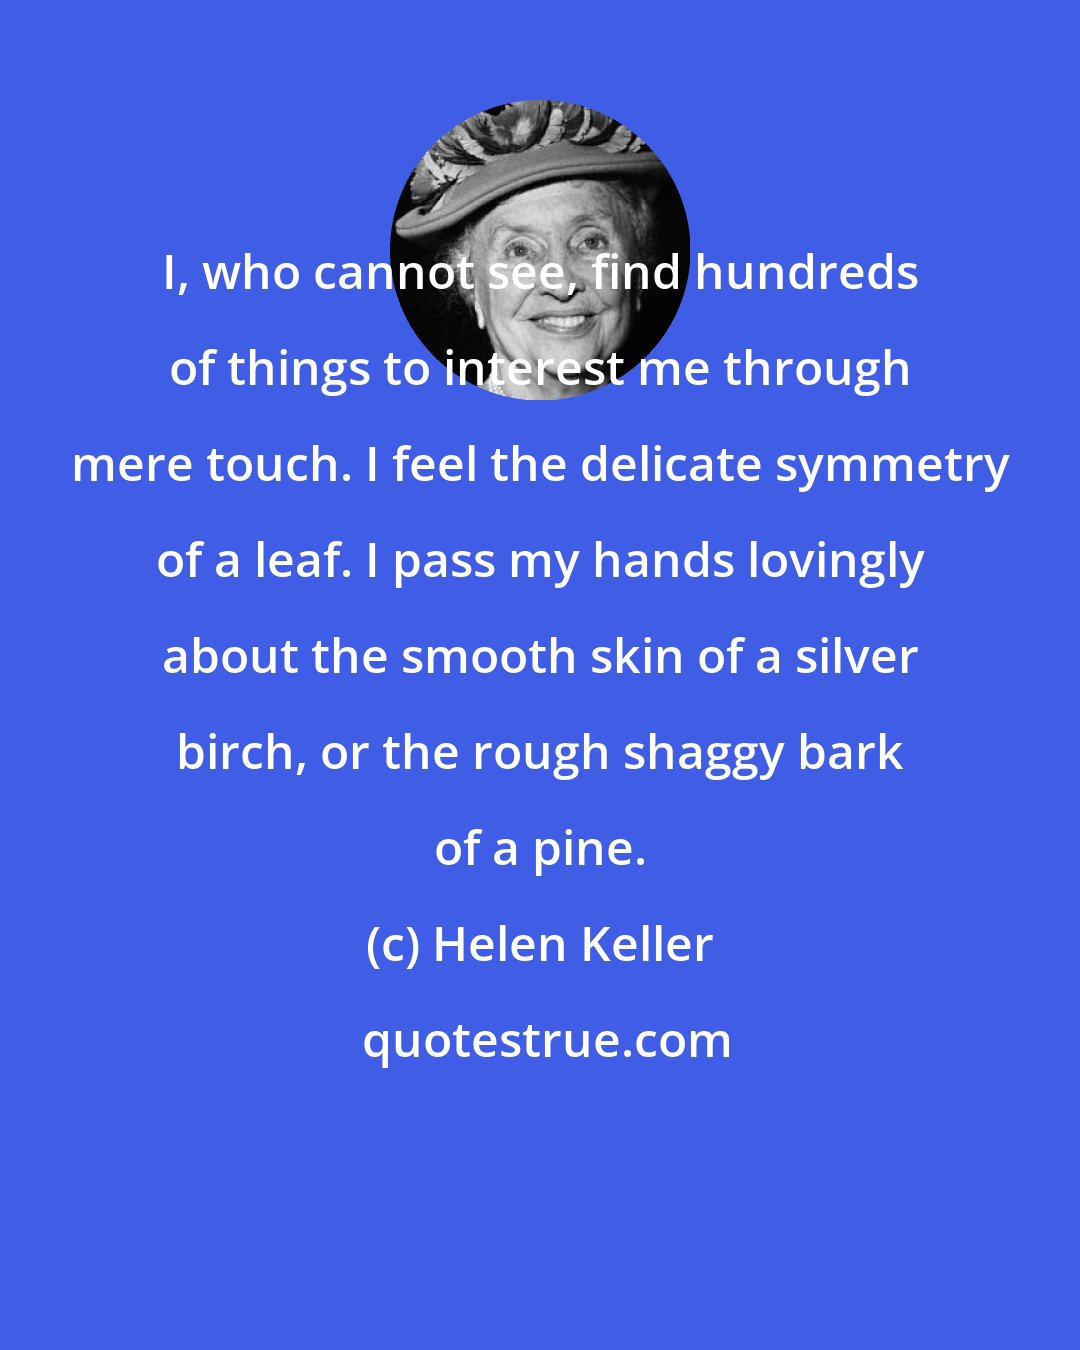 Helen Keller: I, who cannot see, find hundreds of things to interest me through mere touch. I feel the delicate symmetry of a leaf. I pass my hands lovingly about the smooth skin of a silver birch, or the rough shaggy bark of a pine.